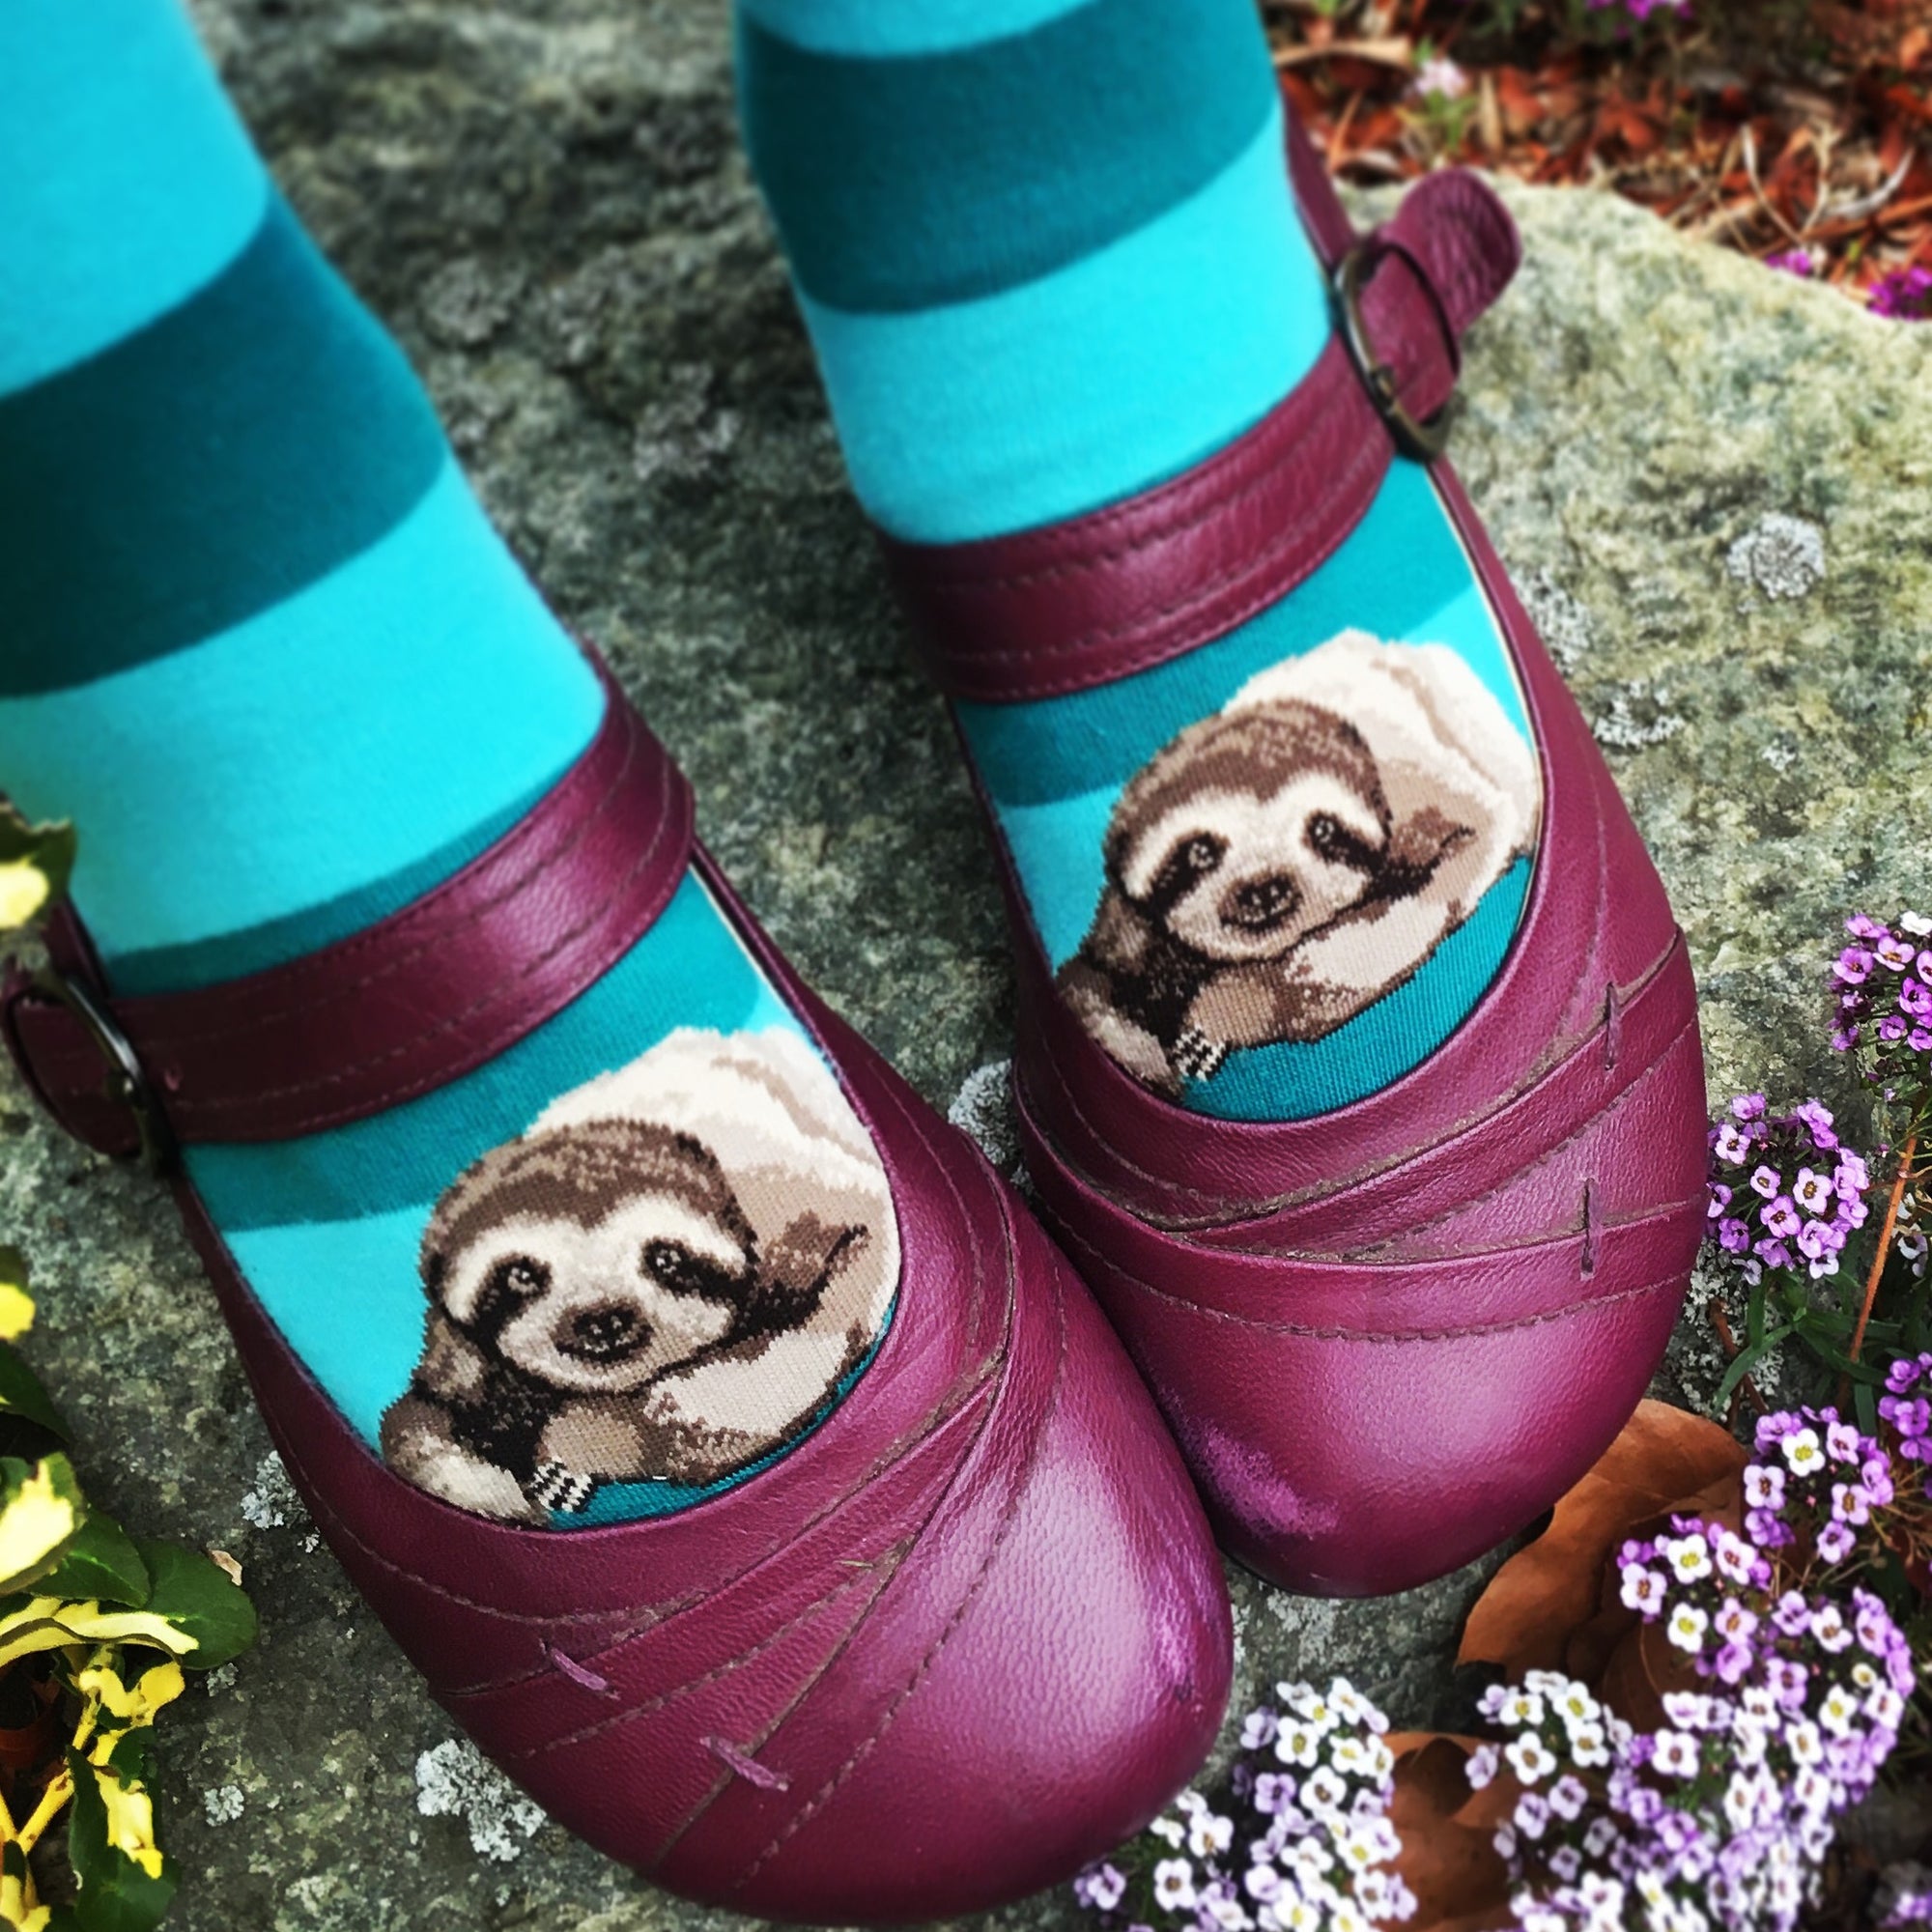 Sloth socks featuring cute sloths peeking out from your shoes & playing in the teal stripes.